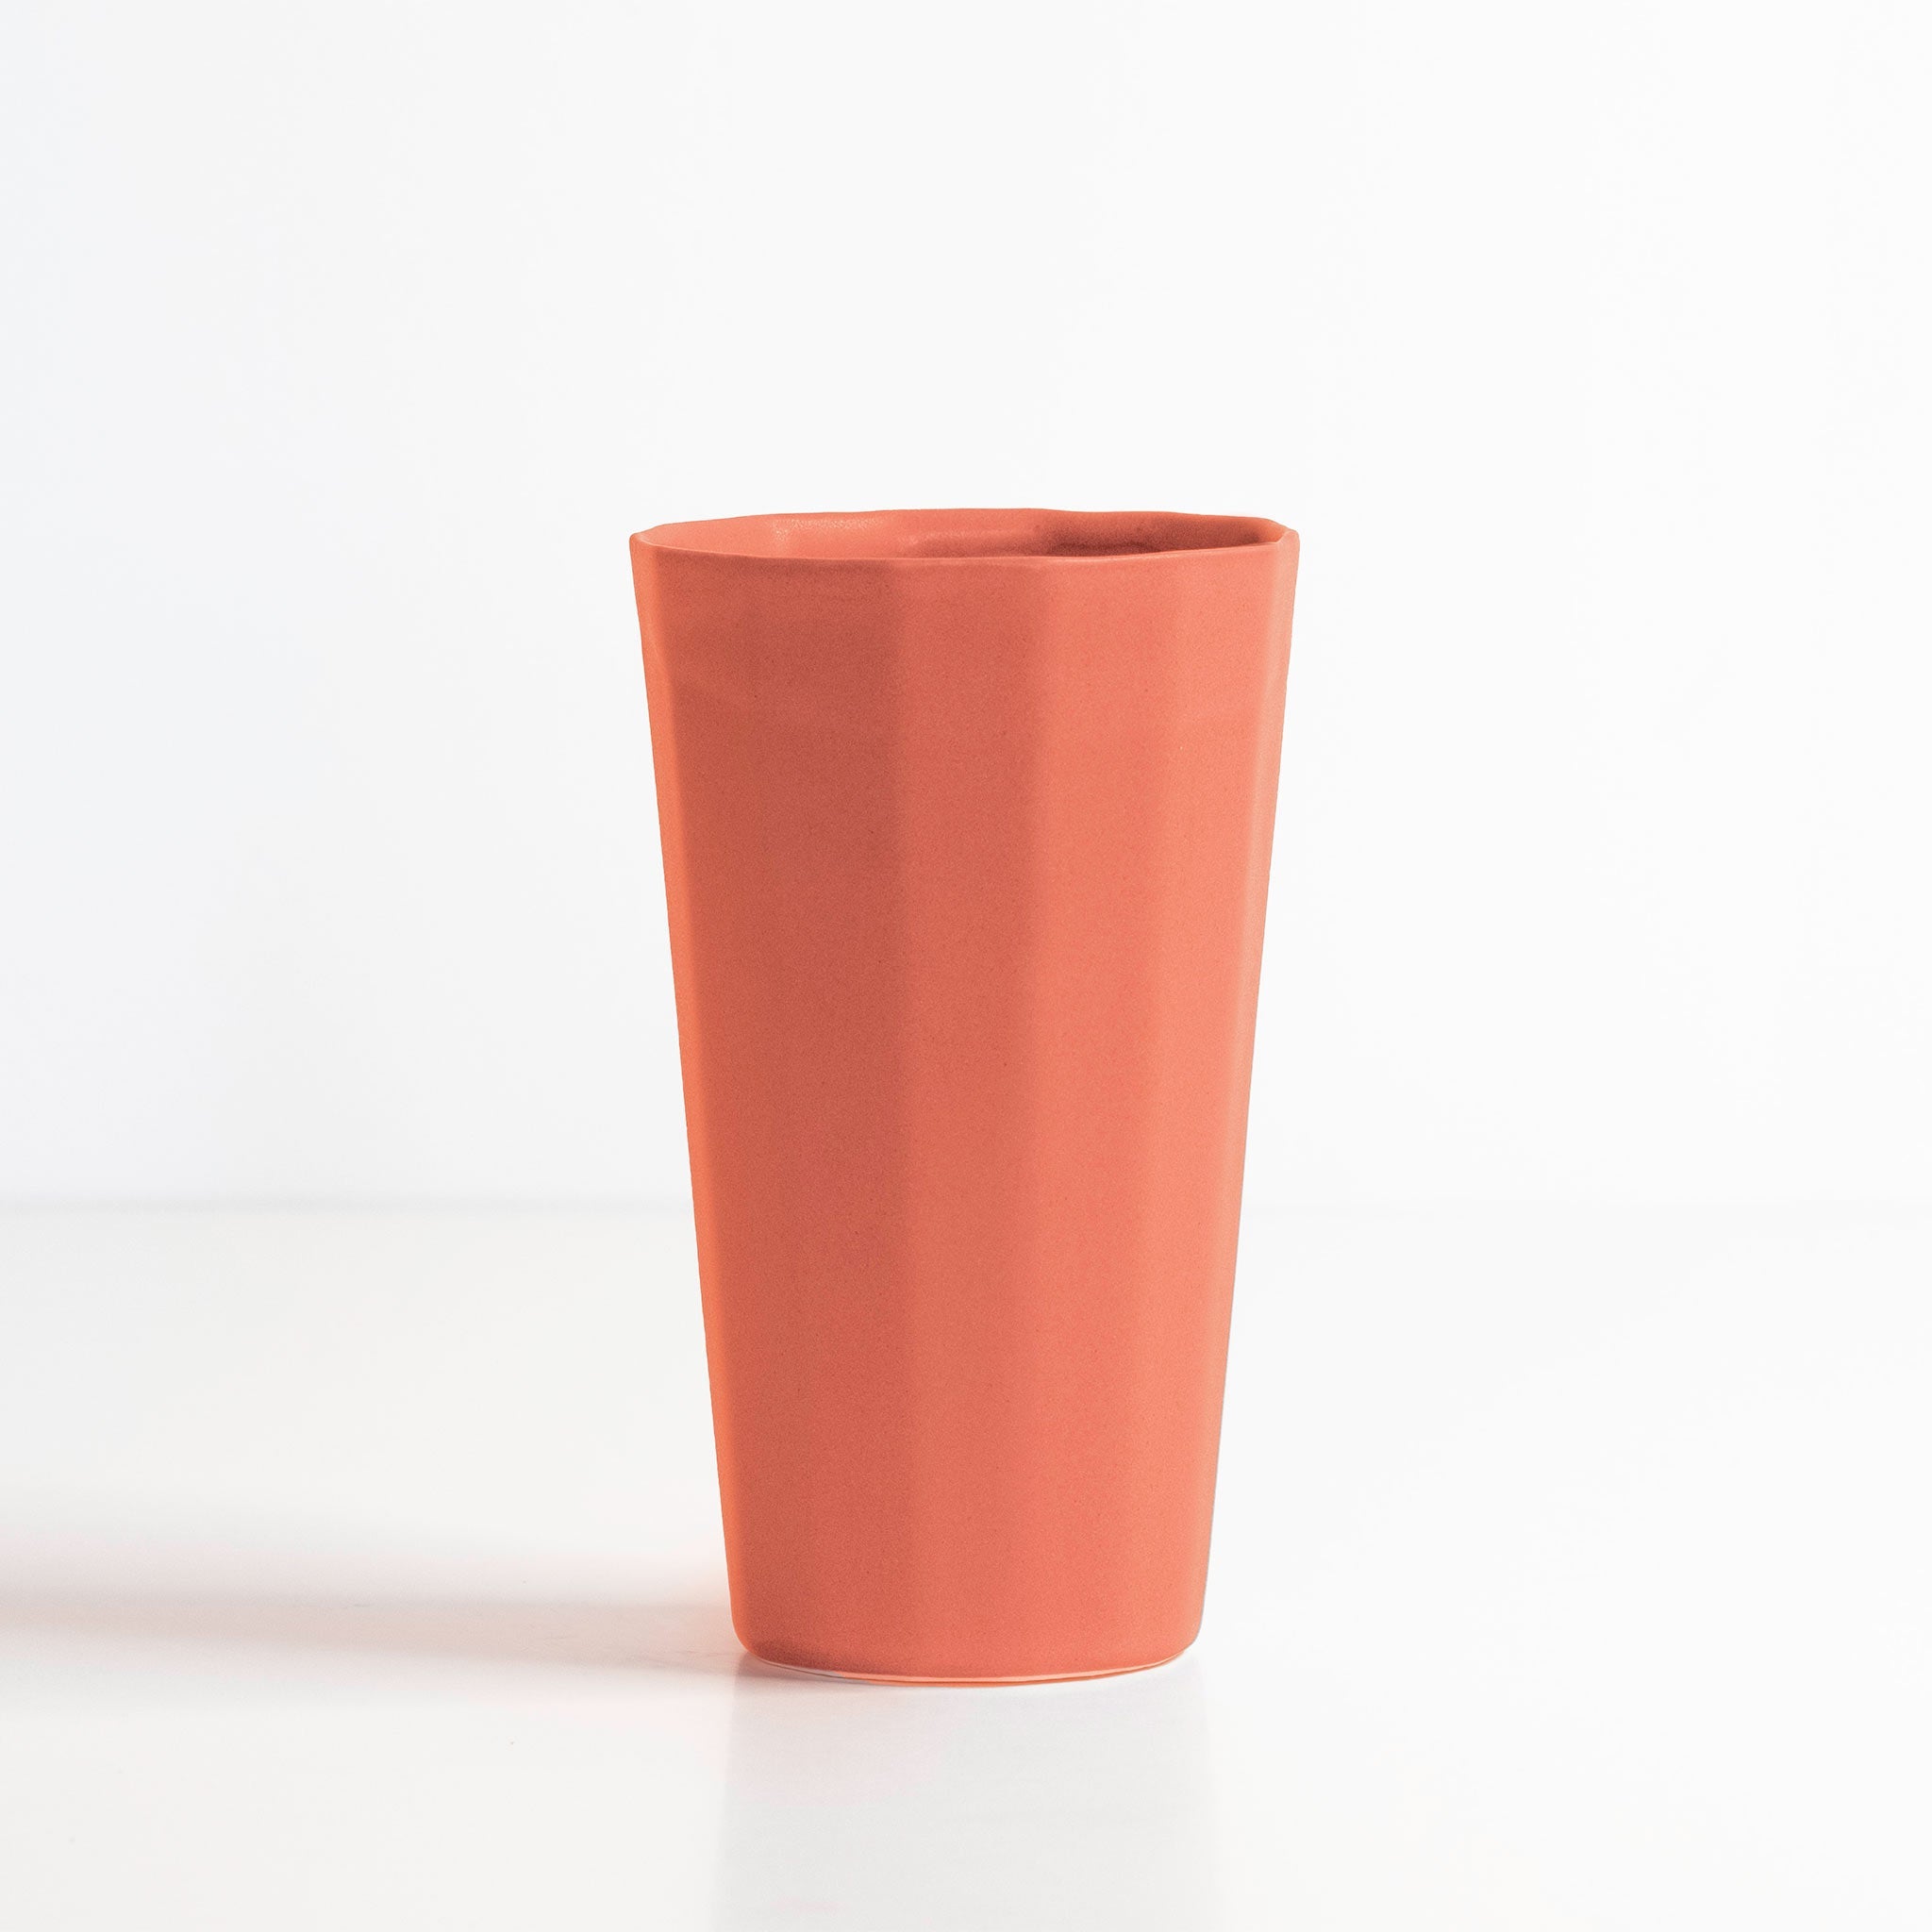 Handmade Porcelain Pint Cup Terracotta Red The Bright Angle